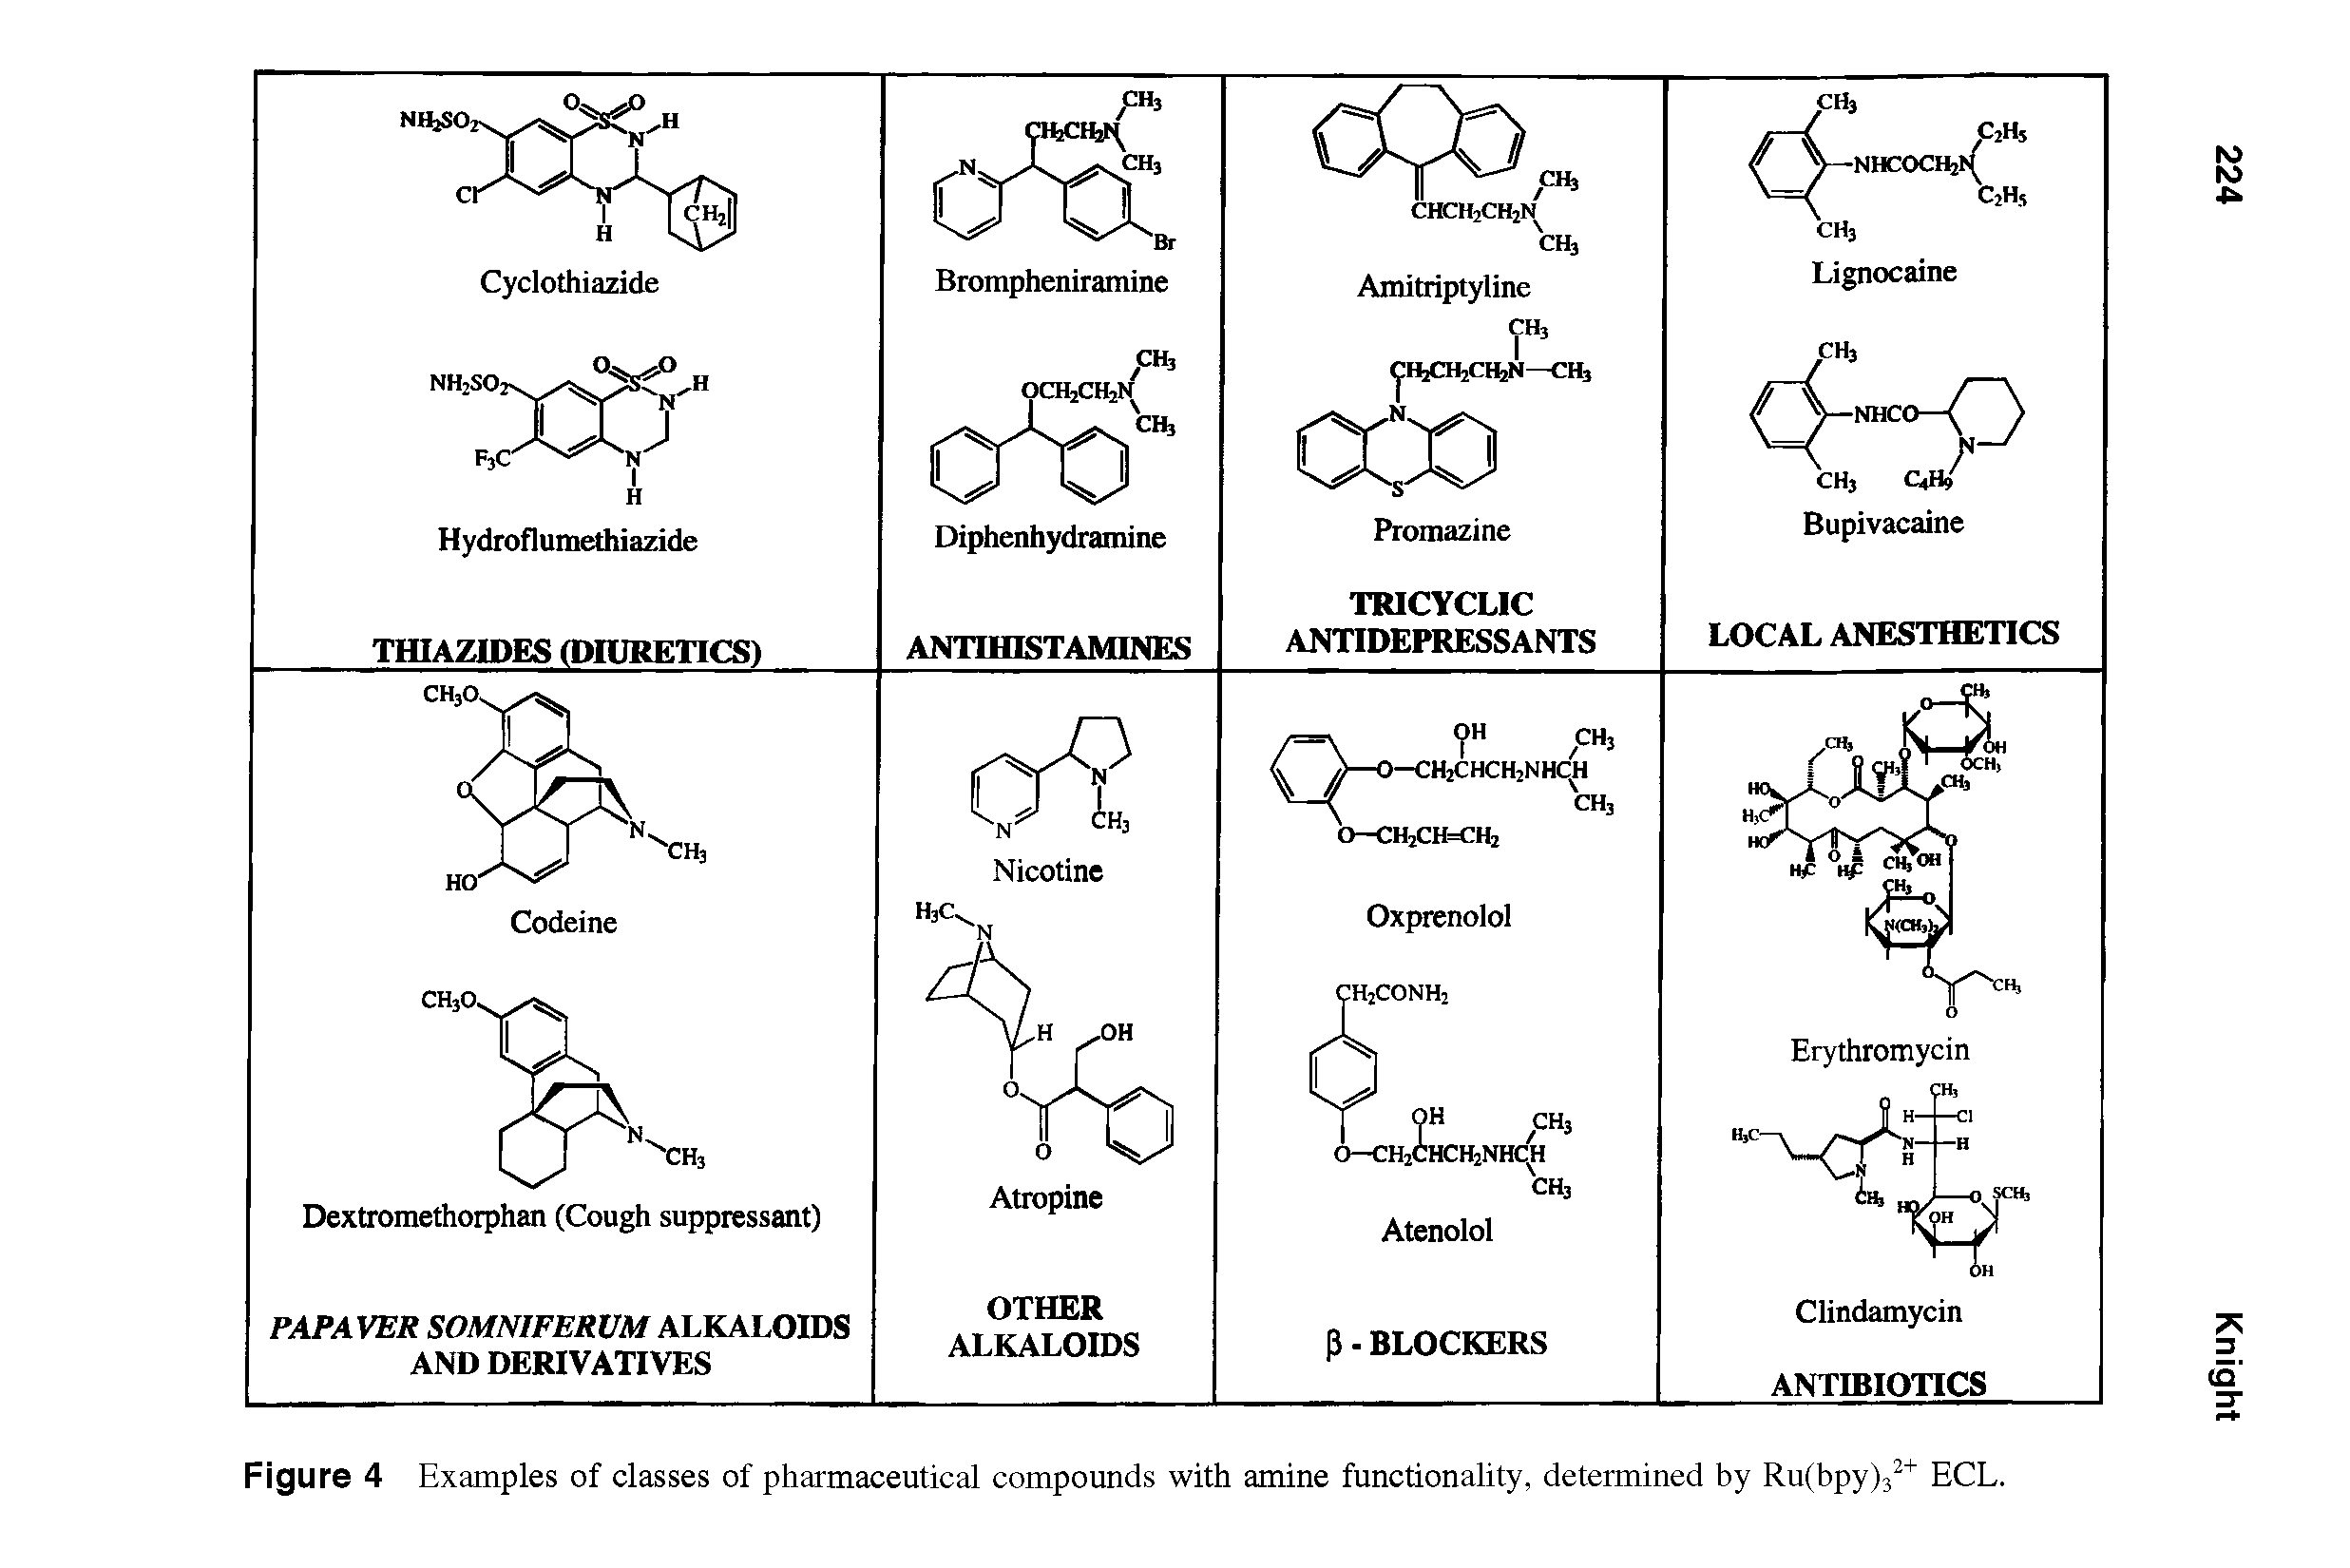 Figure 4 Examples of classes of pharmaceutical compounds with amine functionality, determined by Ru(bpy)32+ ECL.